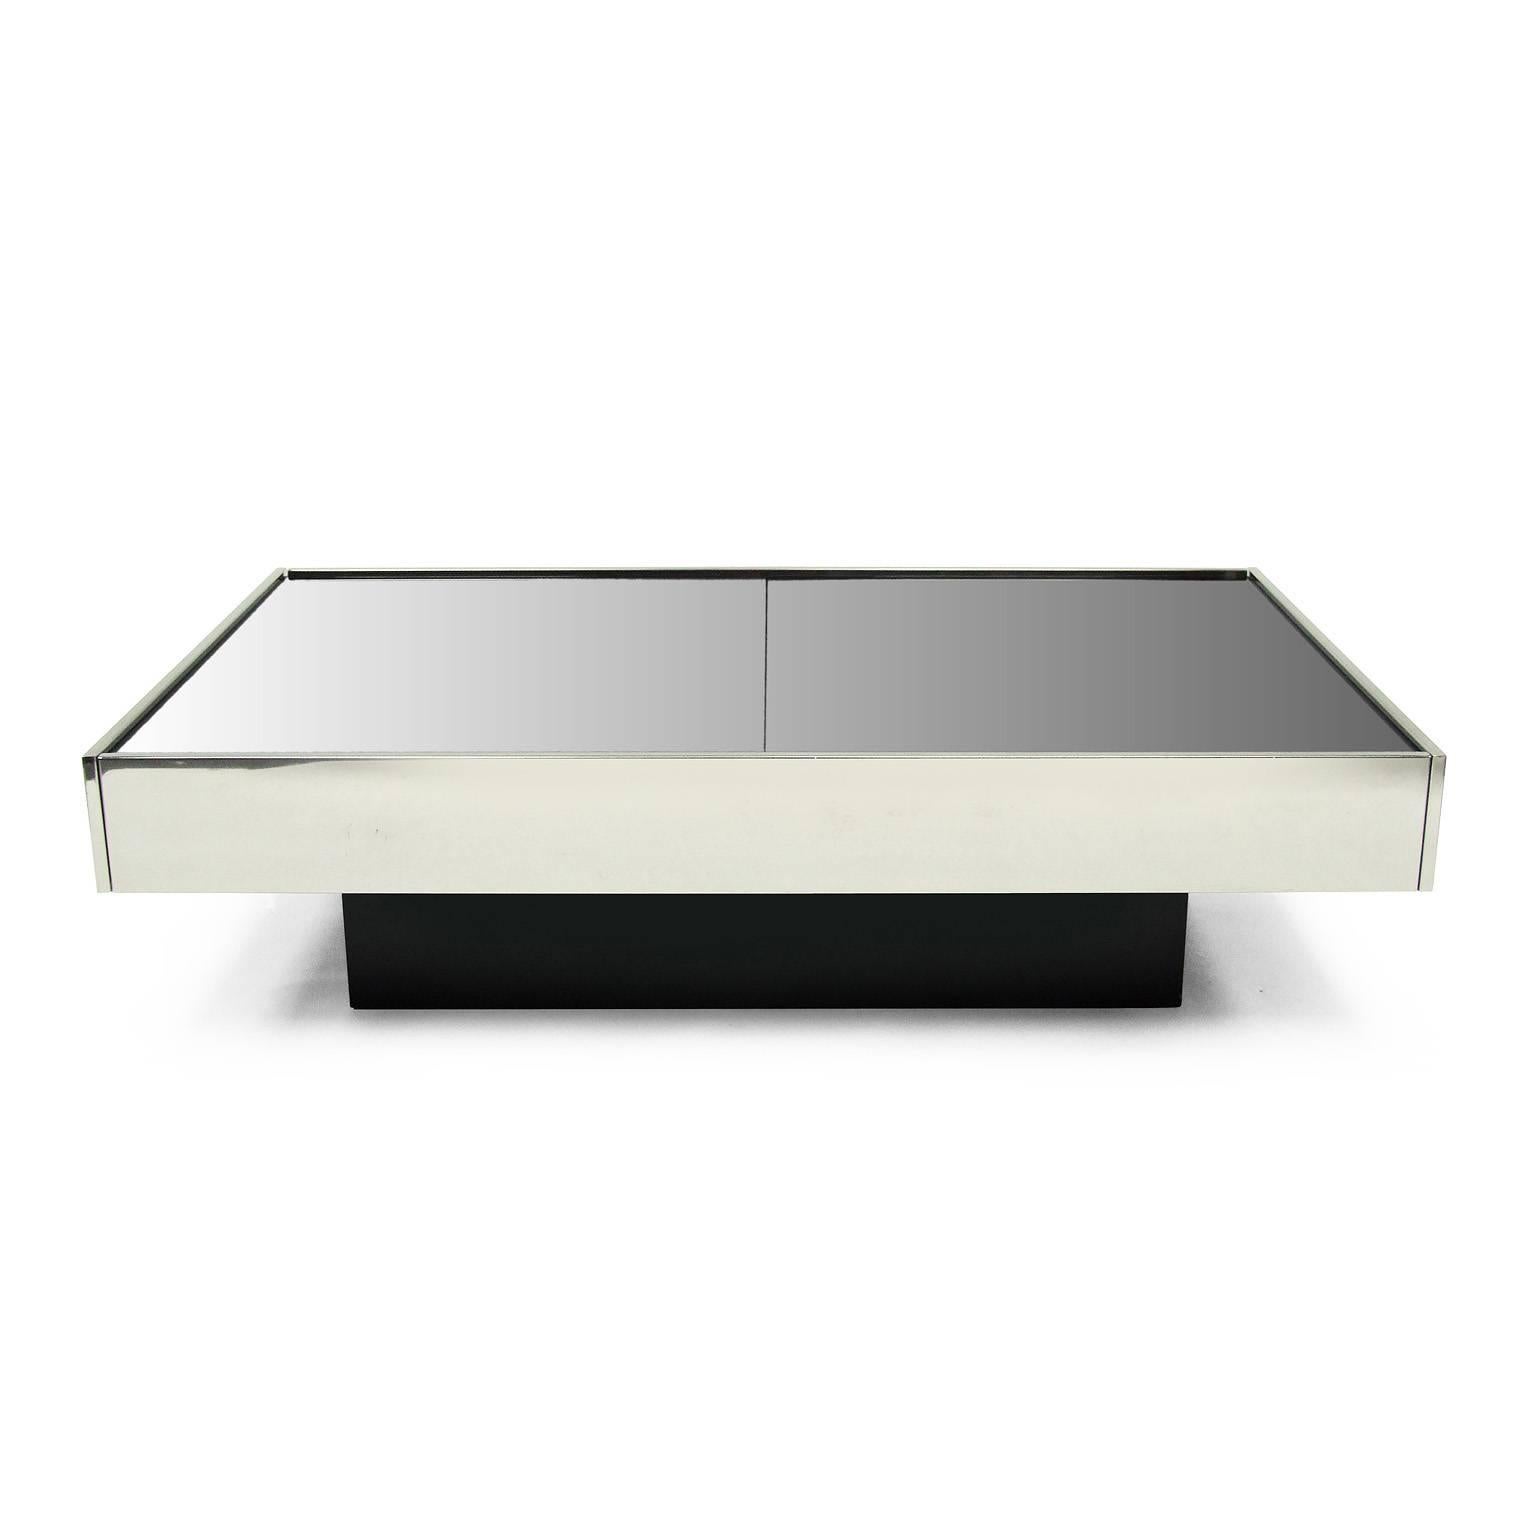 1970s cocktail table designed by Willy Rizzo for Cidue, Italy.

Polished aluminium with two tinted mirror sliding surfaces. Internal storage finished in mirror. Perspex bottle holder.

Black laminate plinth.

This table is a stunning example in